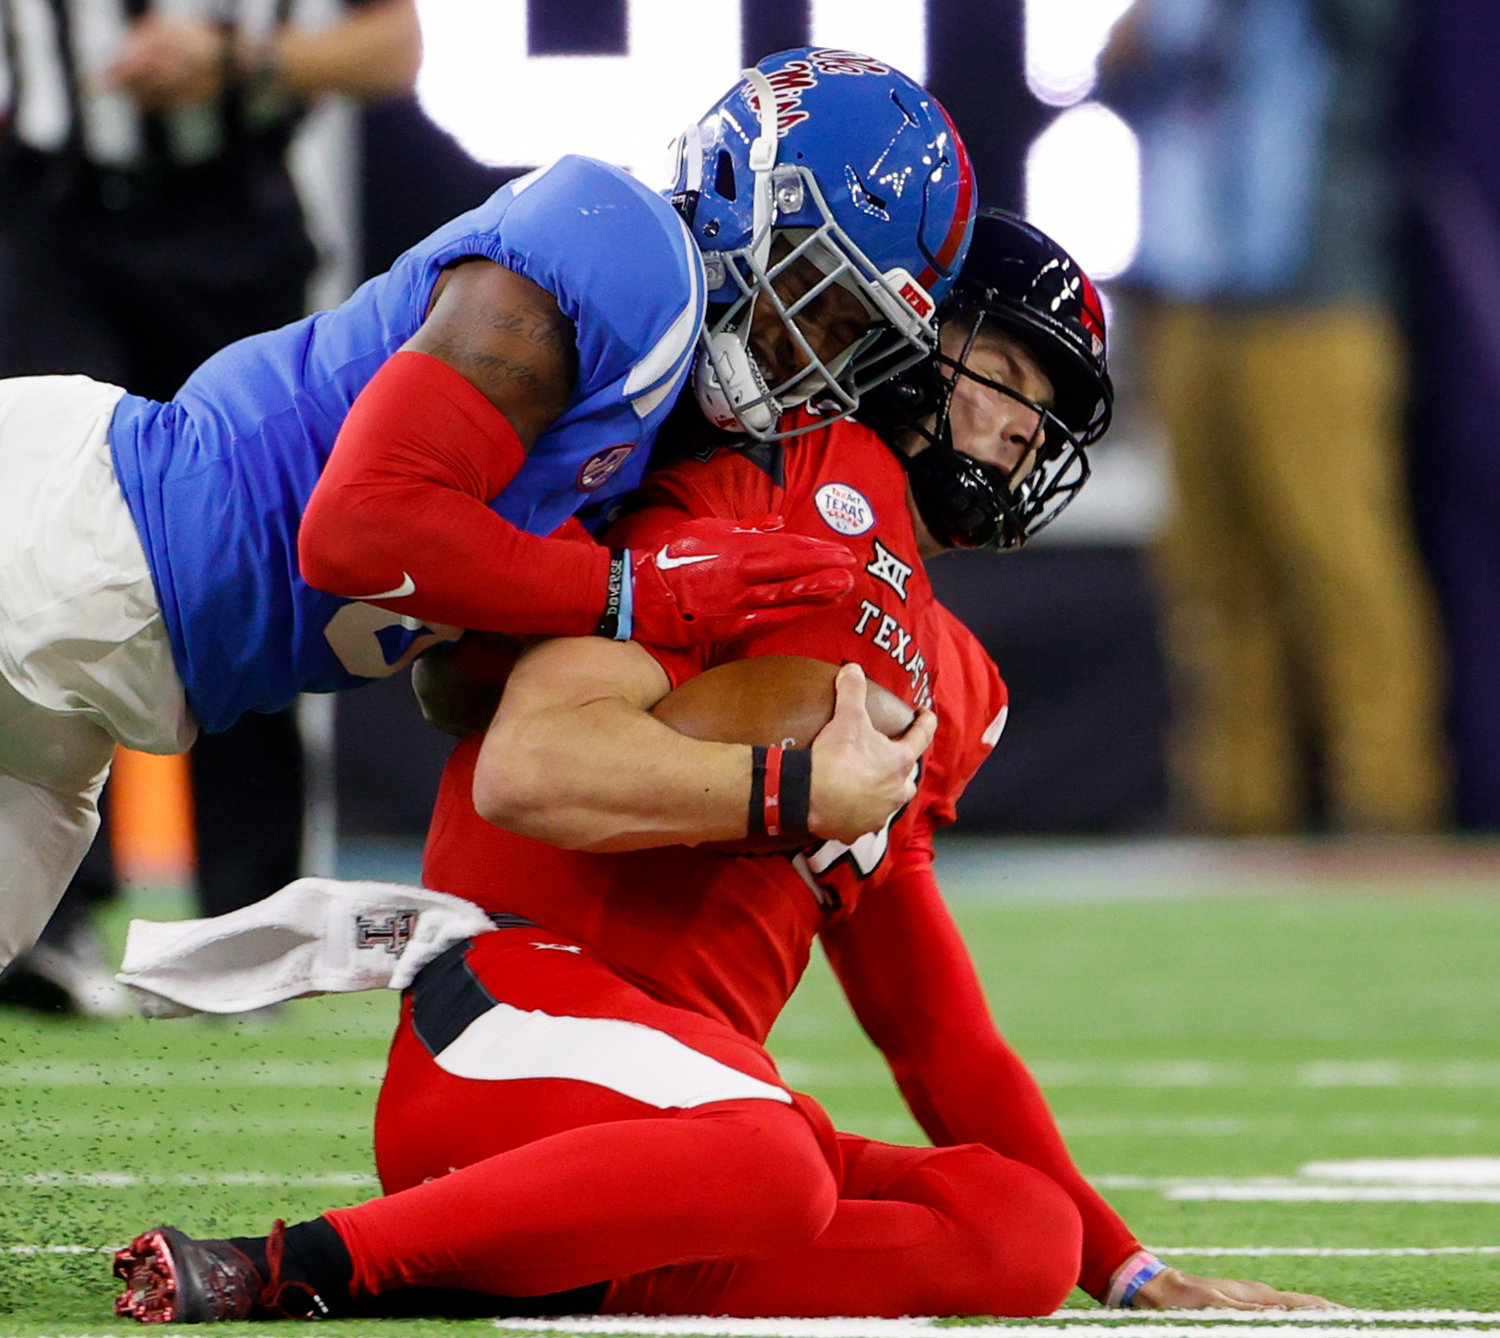 Mississippi linebacker Troy Brown (8) is flagged for targeting on a helmet-to-helmet hit on a sliding Texas Tech quarterback Tyler Shough (12) during the TaxAct Texas Bowl on Dec. 28, 2022 in Houston.